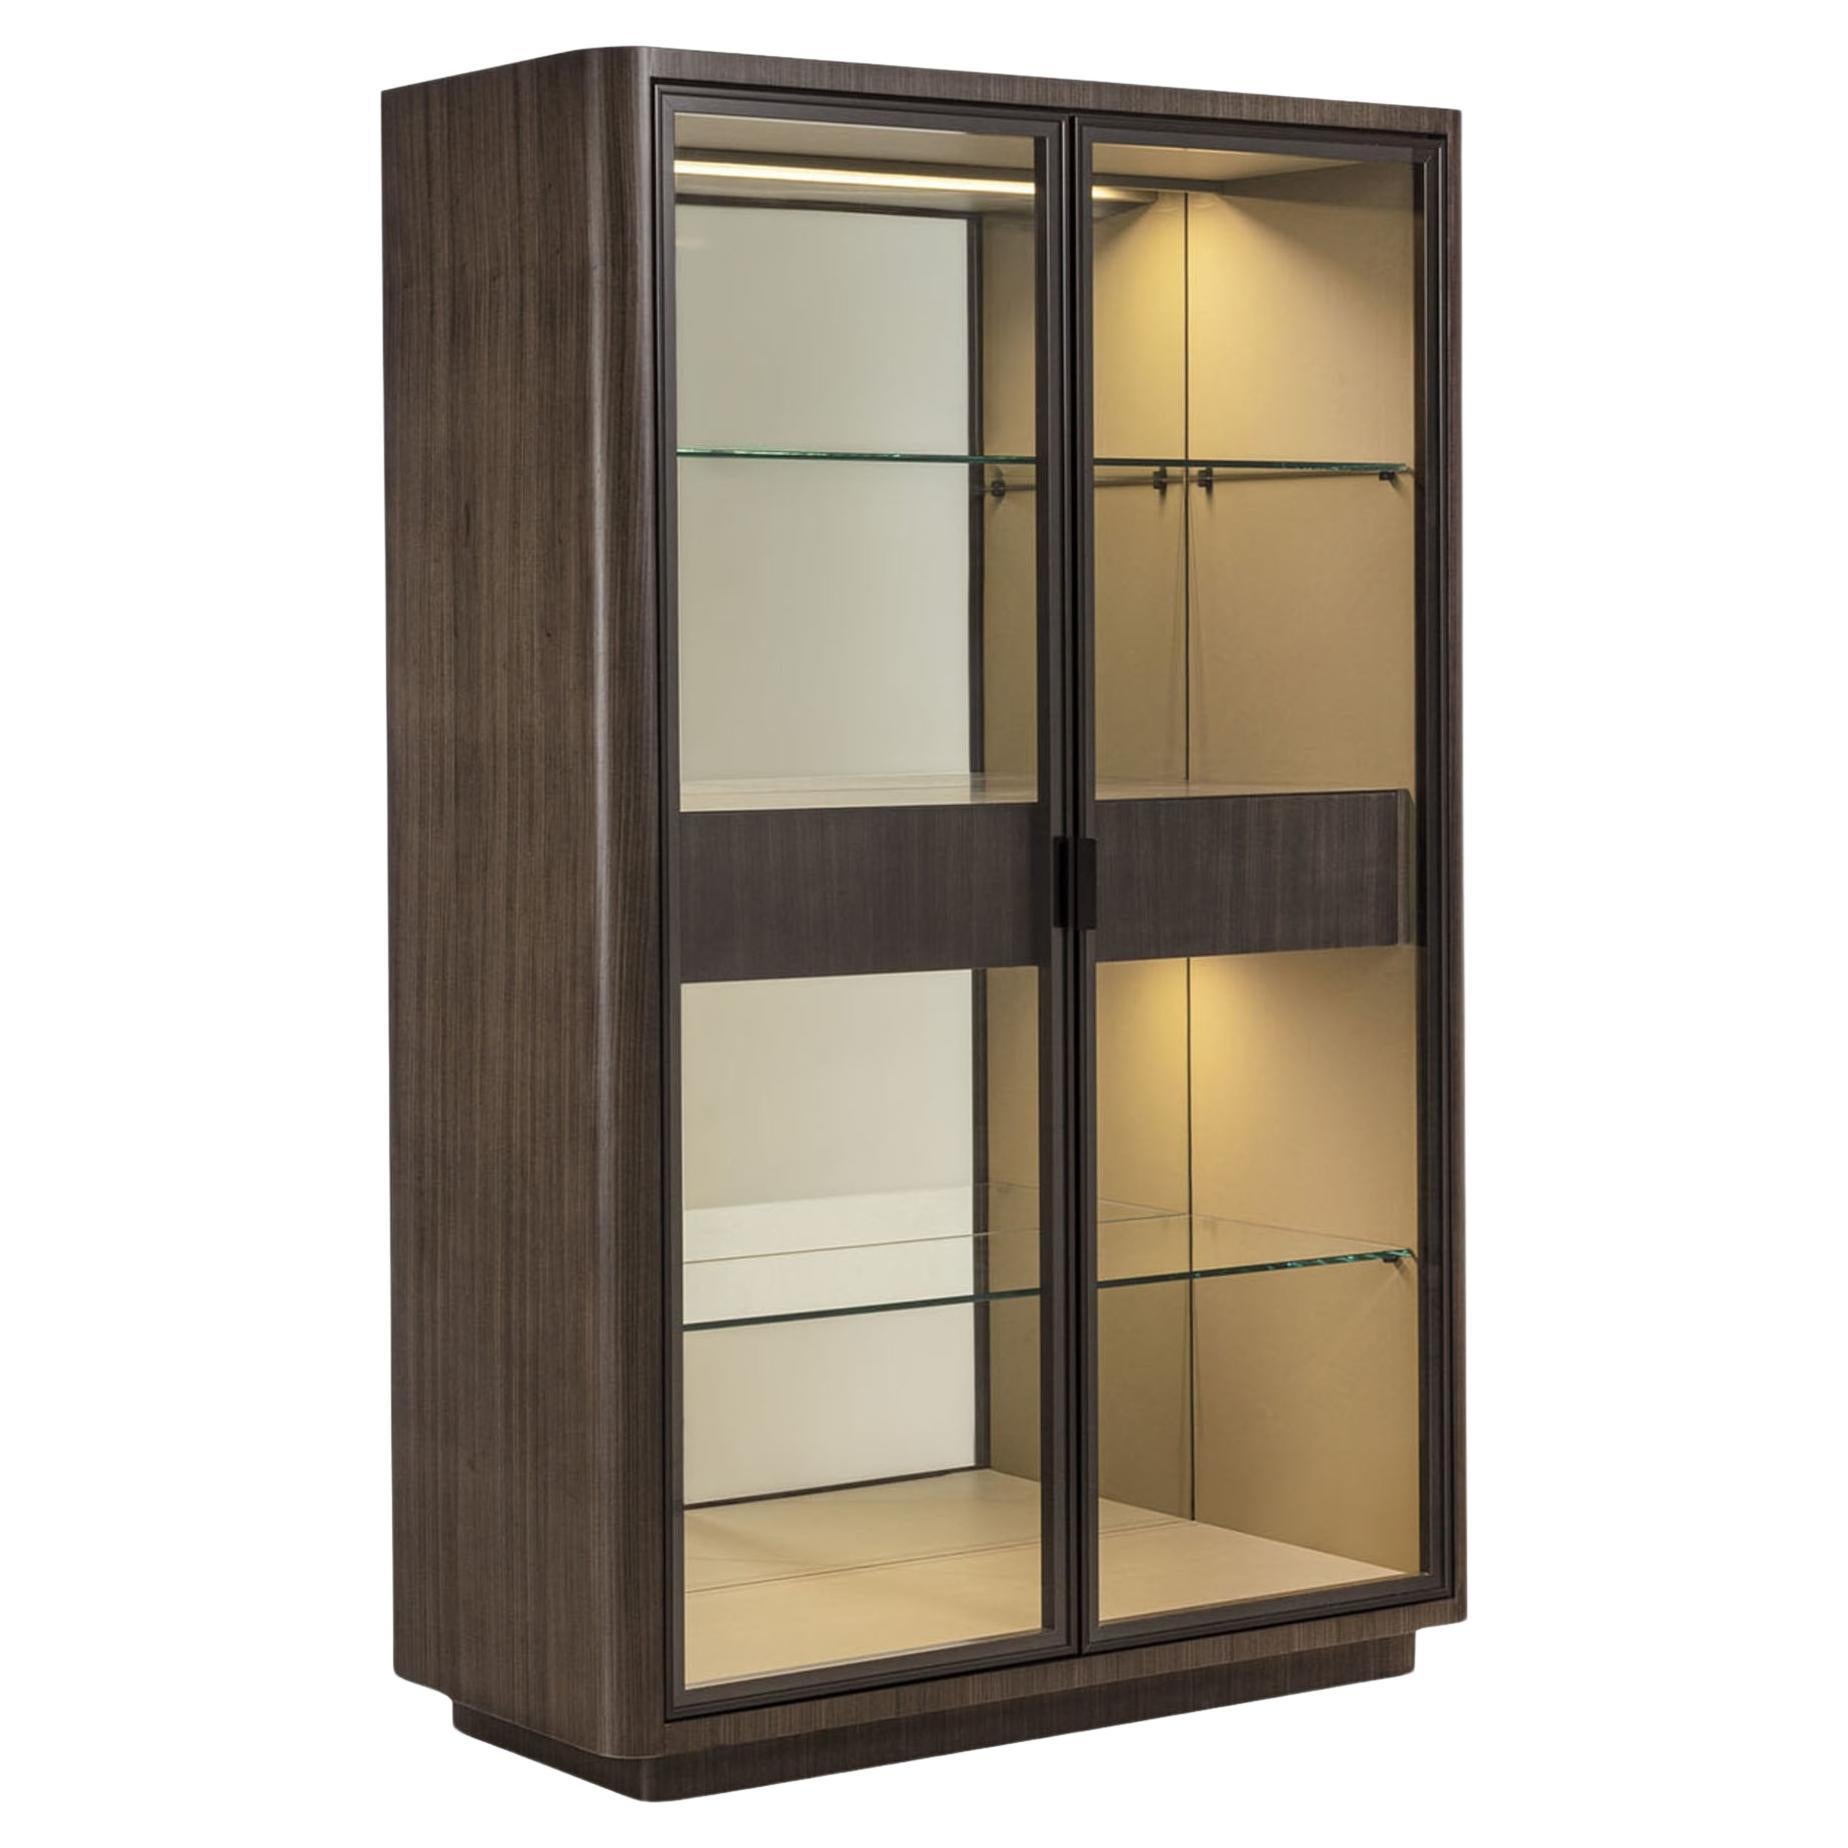 Dafne Glass Cabinet With Drawers For Sale